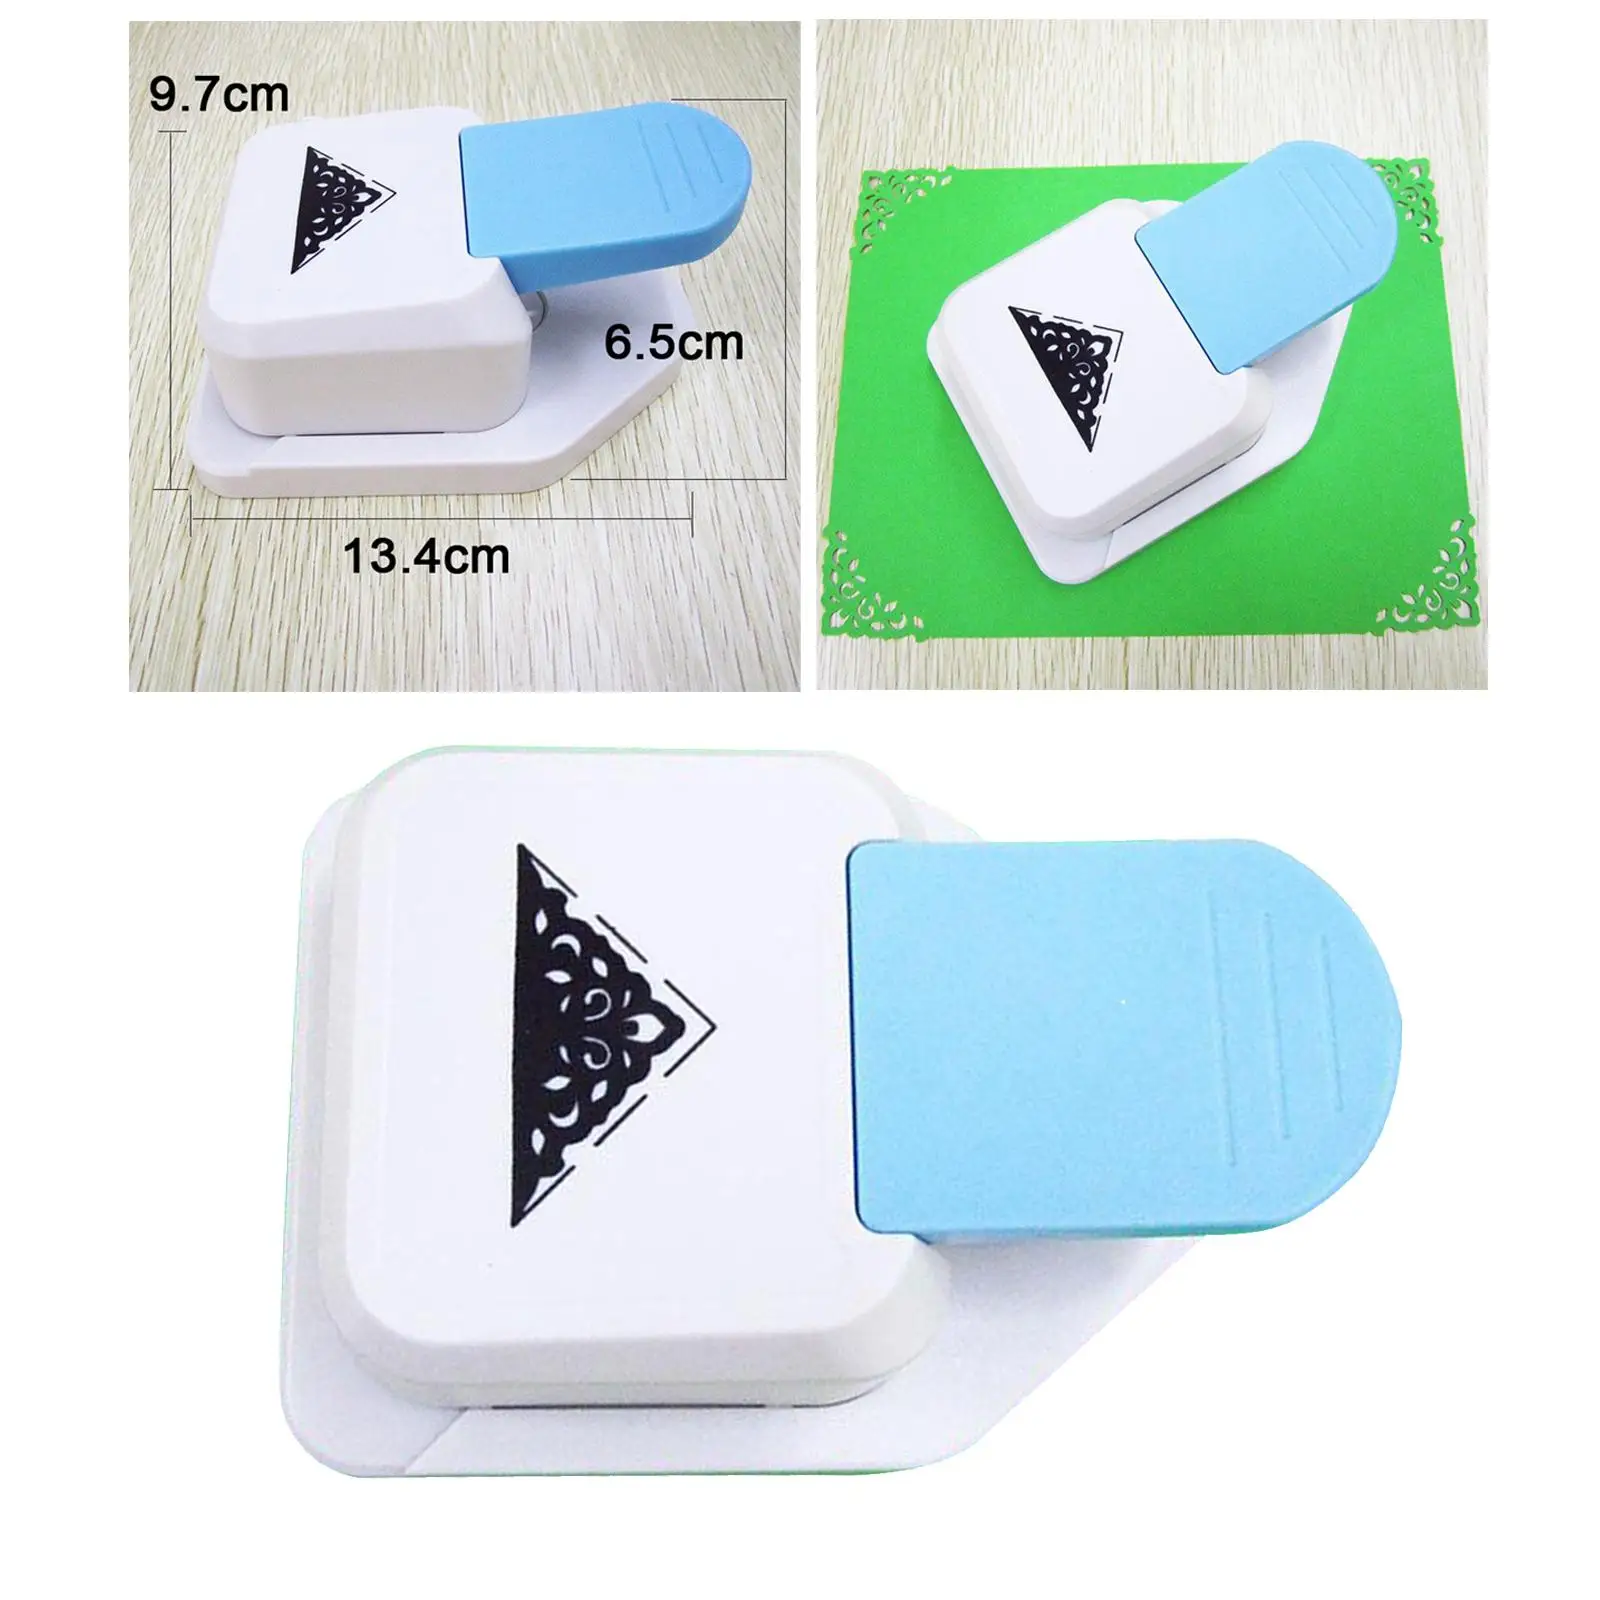 Paper Punch Paper Border Cutter Scrapbooking Bookmark Punchers Craft Tool